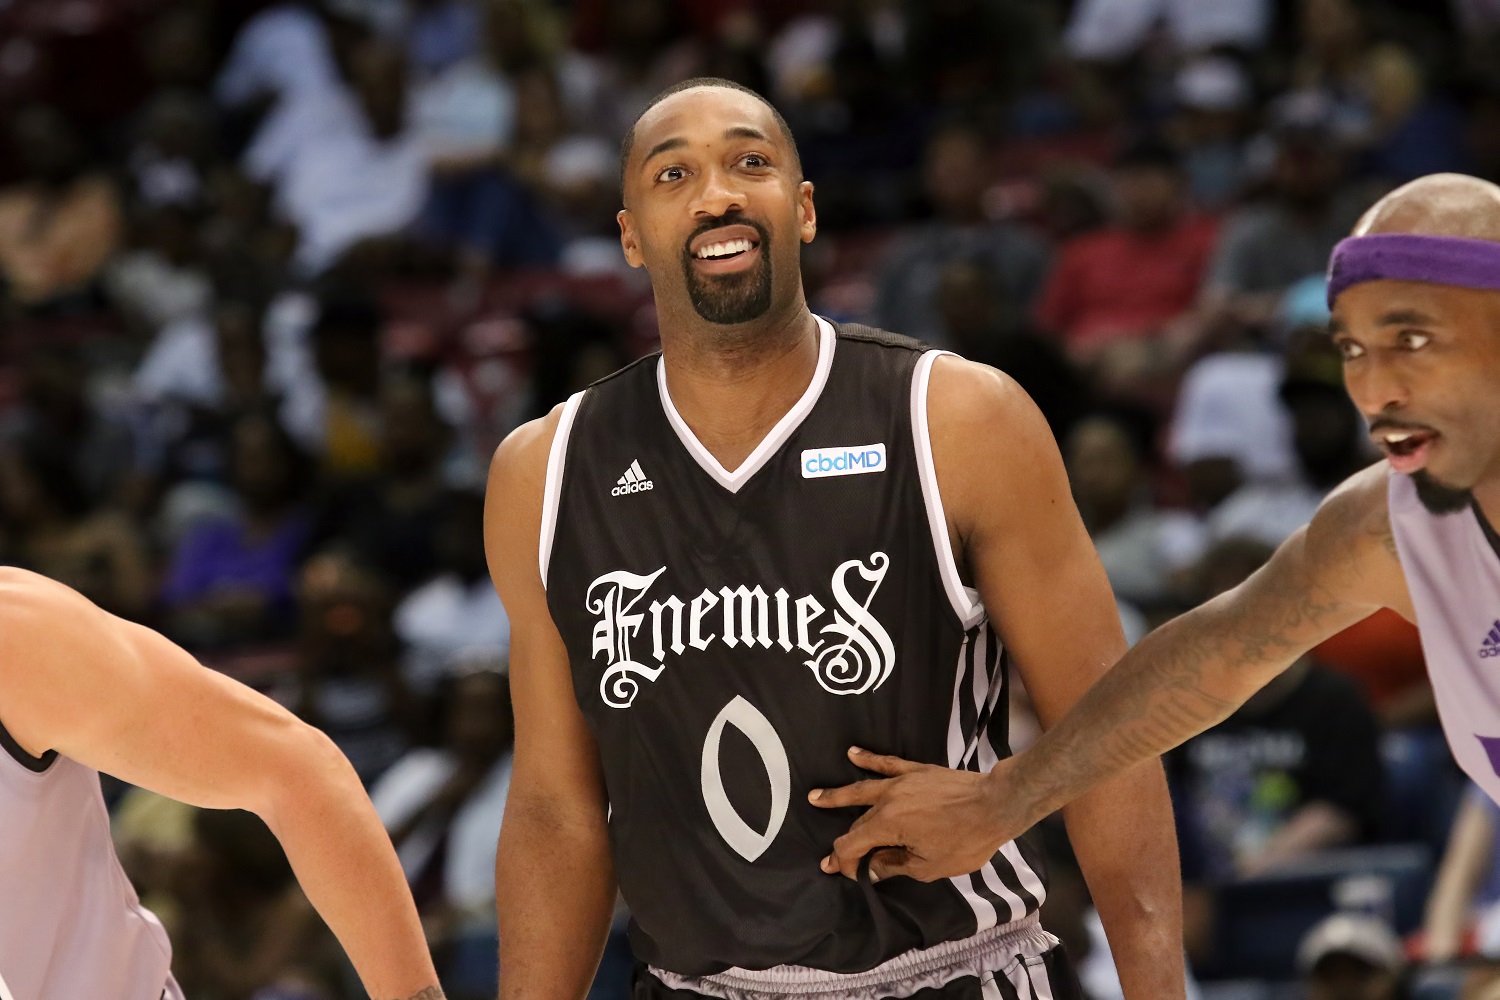 Gilbert Arenas during the BIG3 game between Enemies and Ghost Ballers on July 6, 2019.